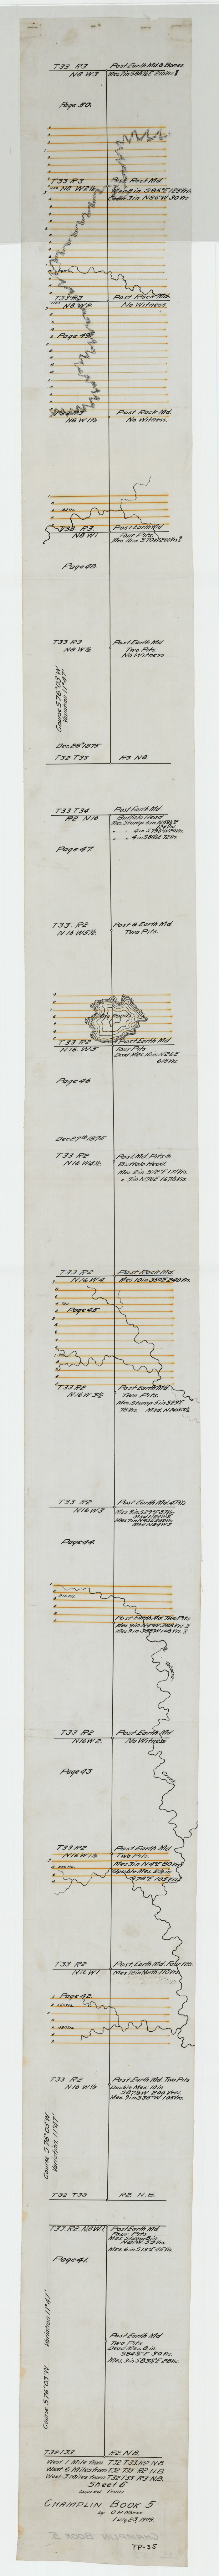 93175, Sheet 6 copied from Champlin Book 5 [Strip Map showing T. & P. connecting lines], Twichell Survey Records